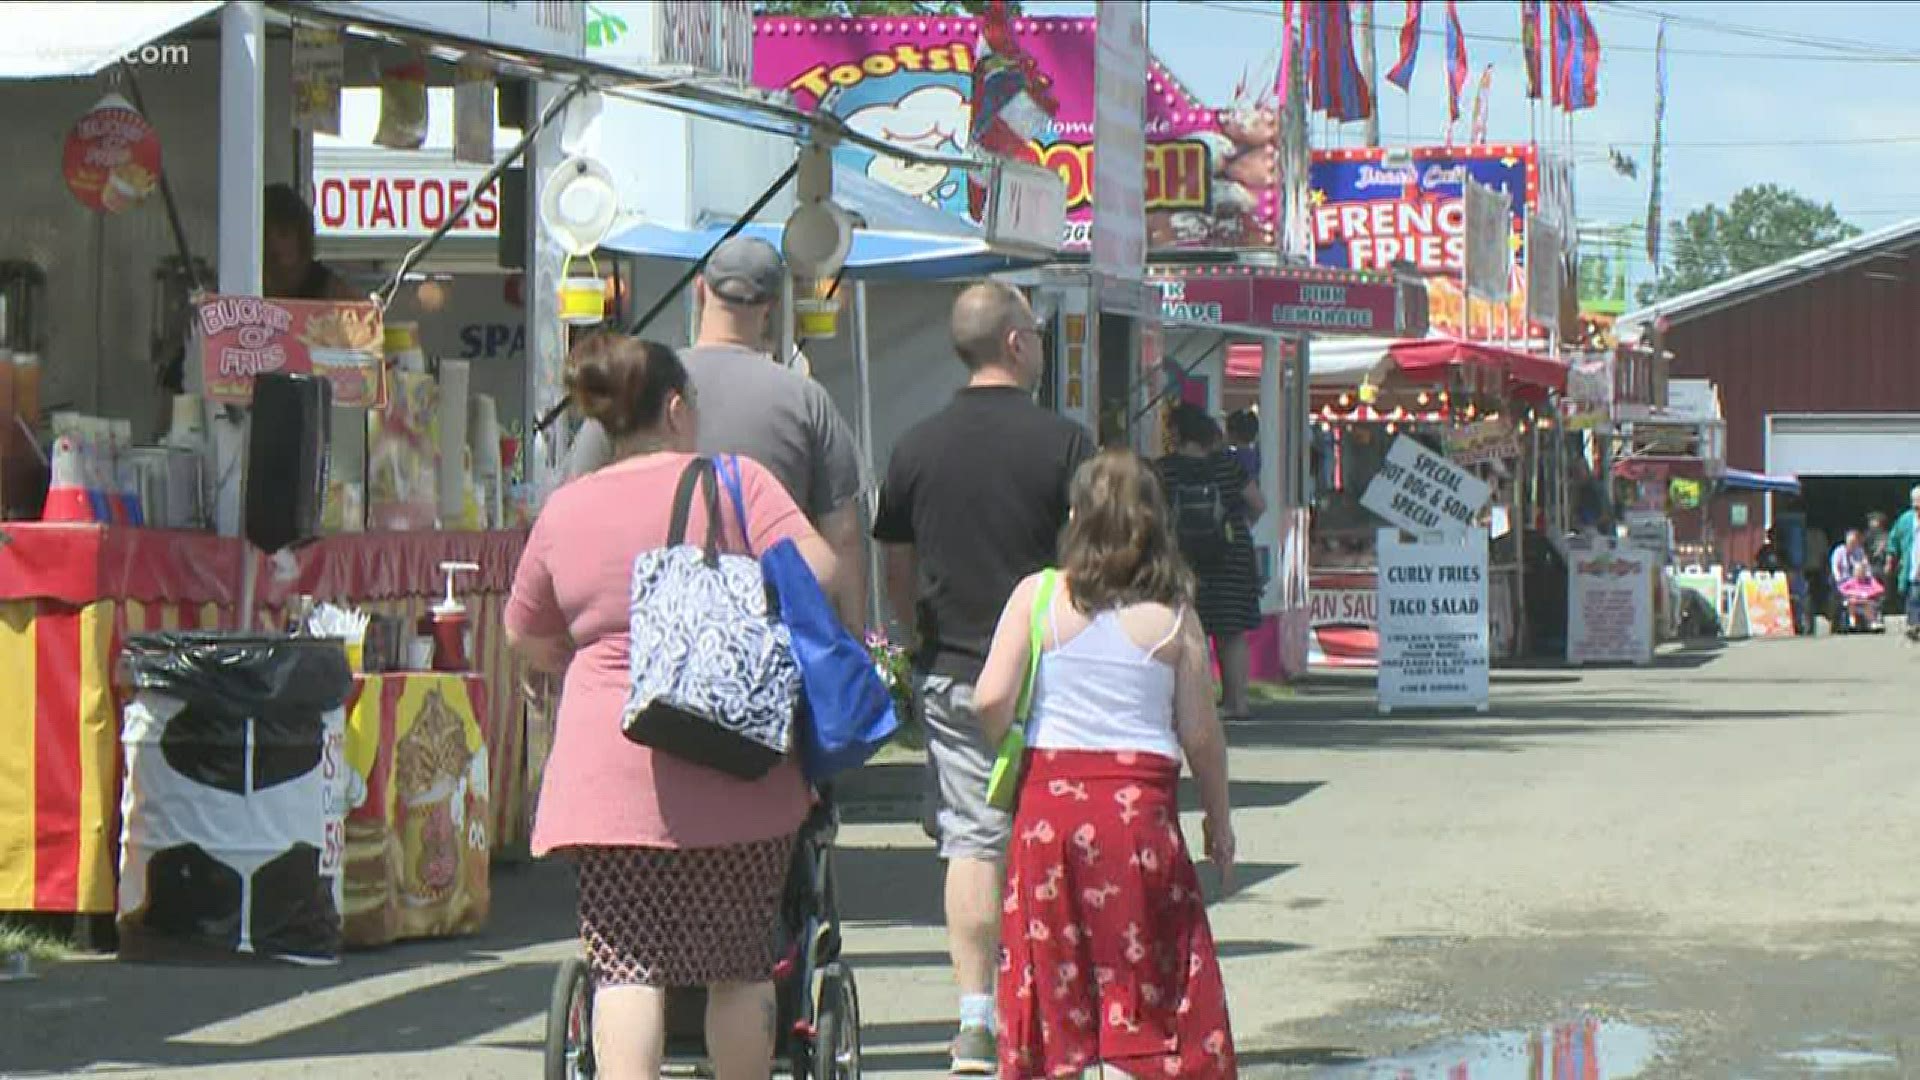 The Chautauqua County fair board decided last night to cancel the event for the first time since World War Two to help keep the community safe.